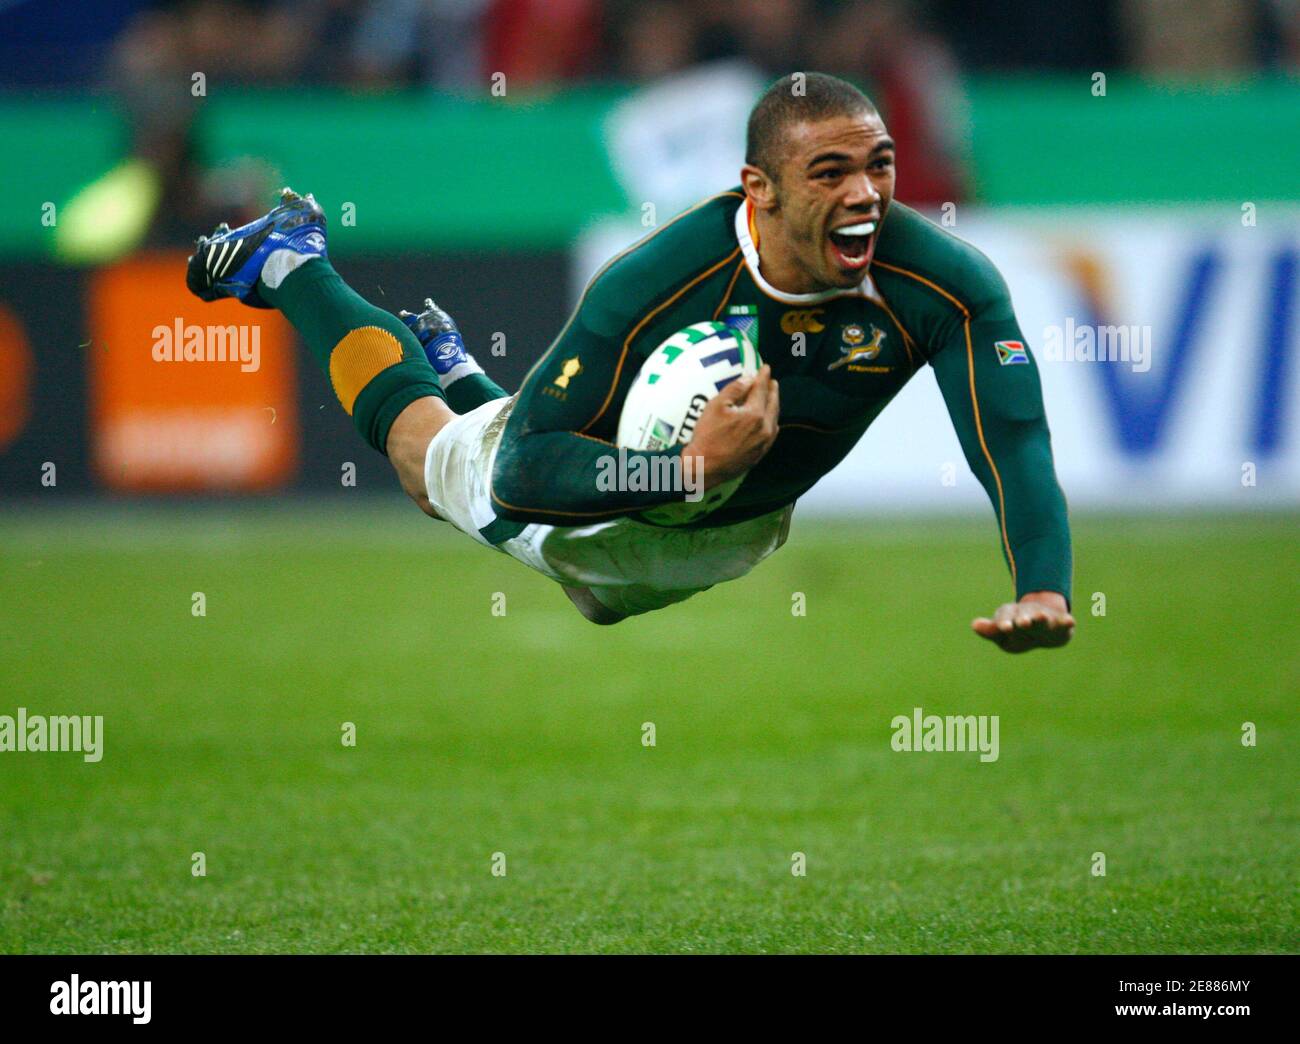 South Africa's Bryan Habana scores a try against Argentina  during their semi-final Rugby World Cup match at the Stade de France Stadium in Saint-Denis, near Paris, October 14, 2007.              REUTERS/Eddie Keogh    (FRANCE) Stock Photo